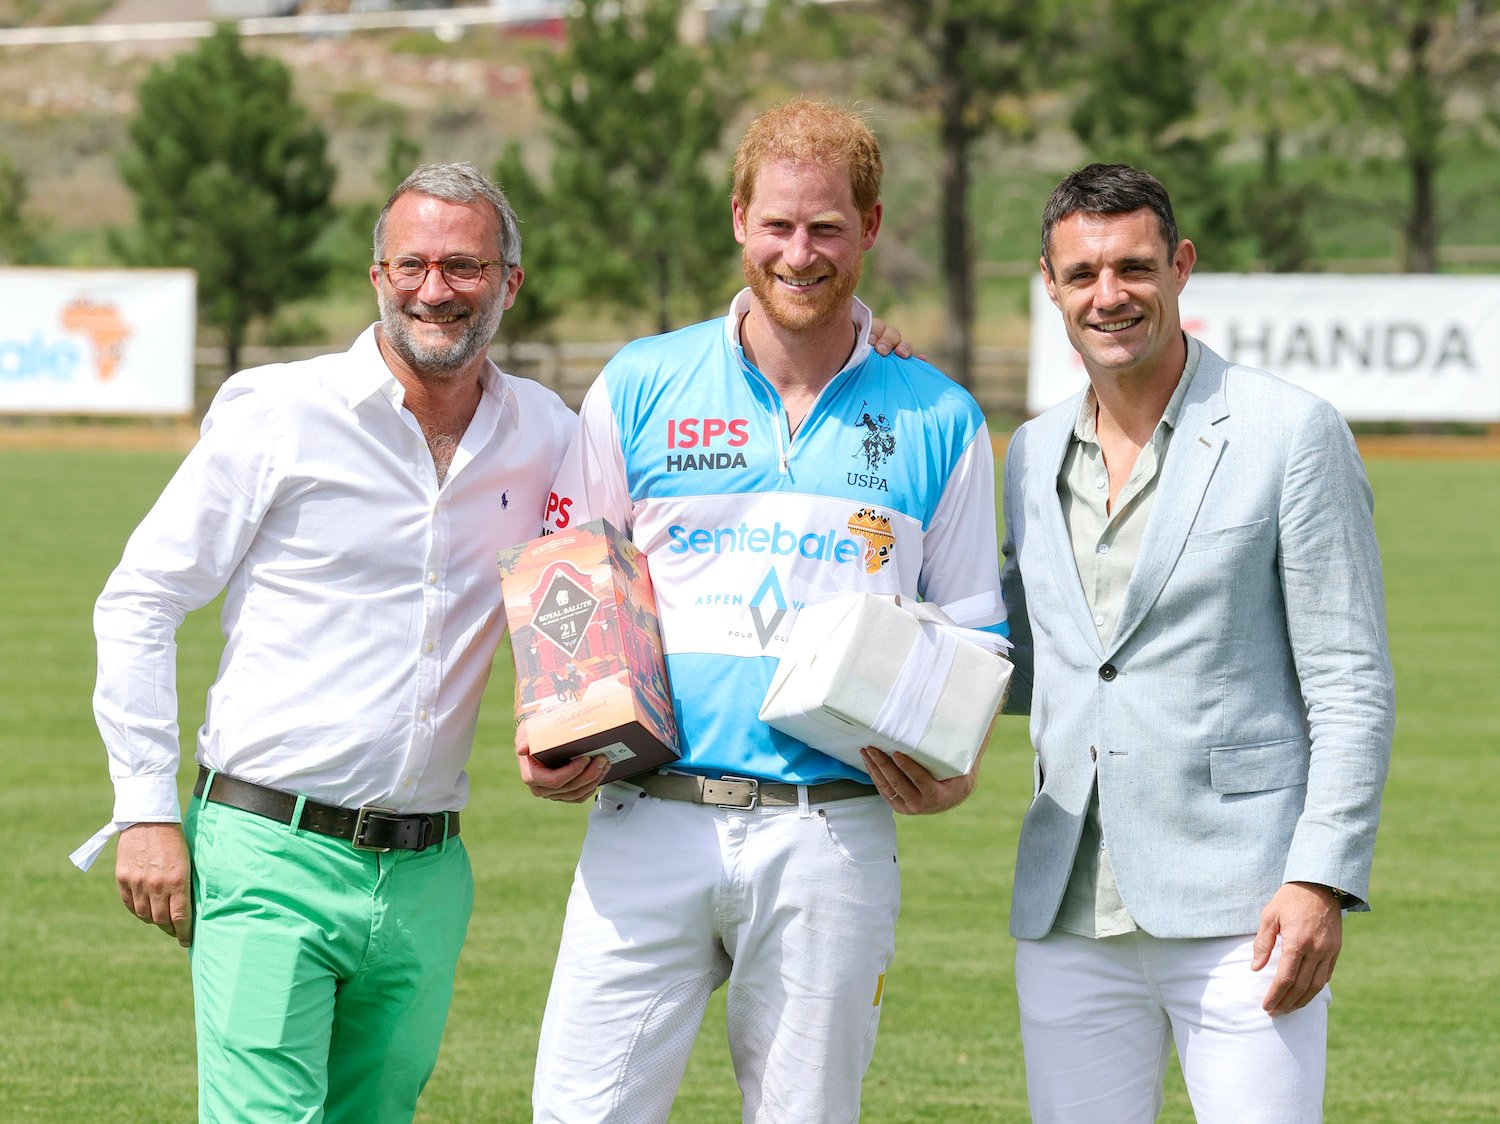 Prince Harry wears a brightly colored polo shirt at the Sentebale ISPS Handa Polo Cup as his body language shows relaxed and smiling gestures